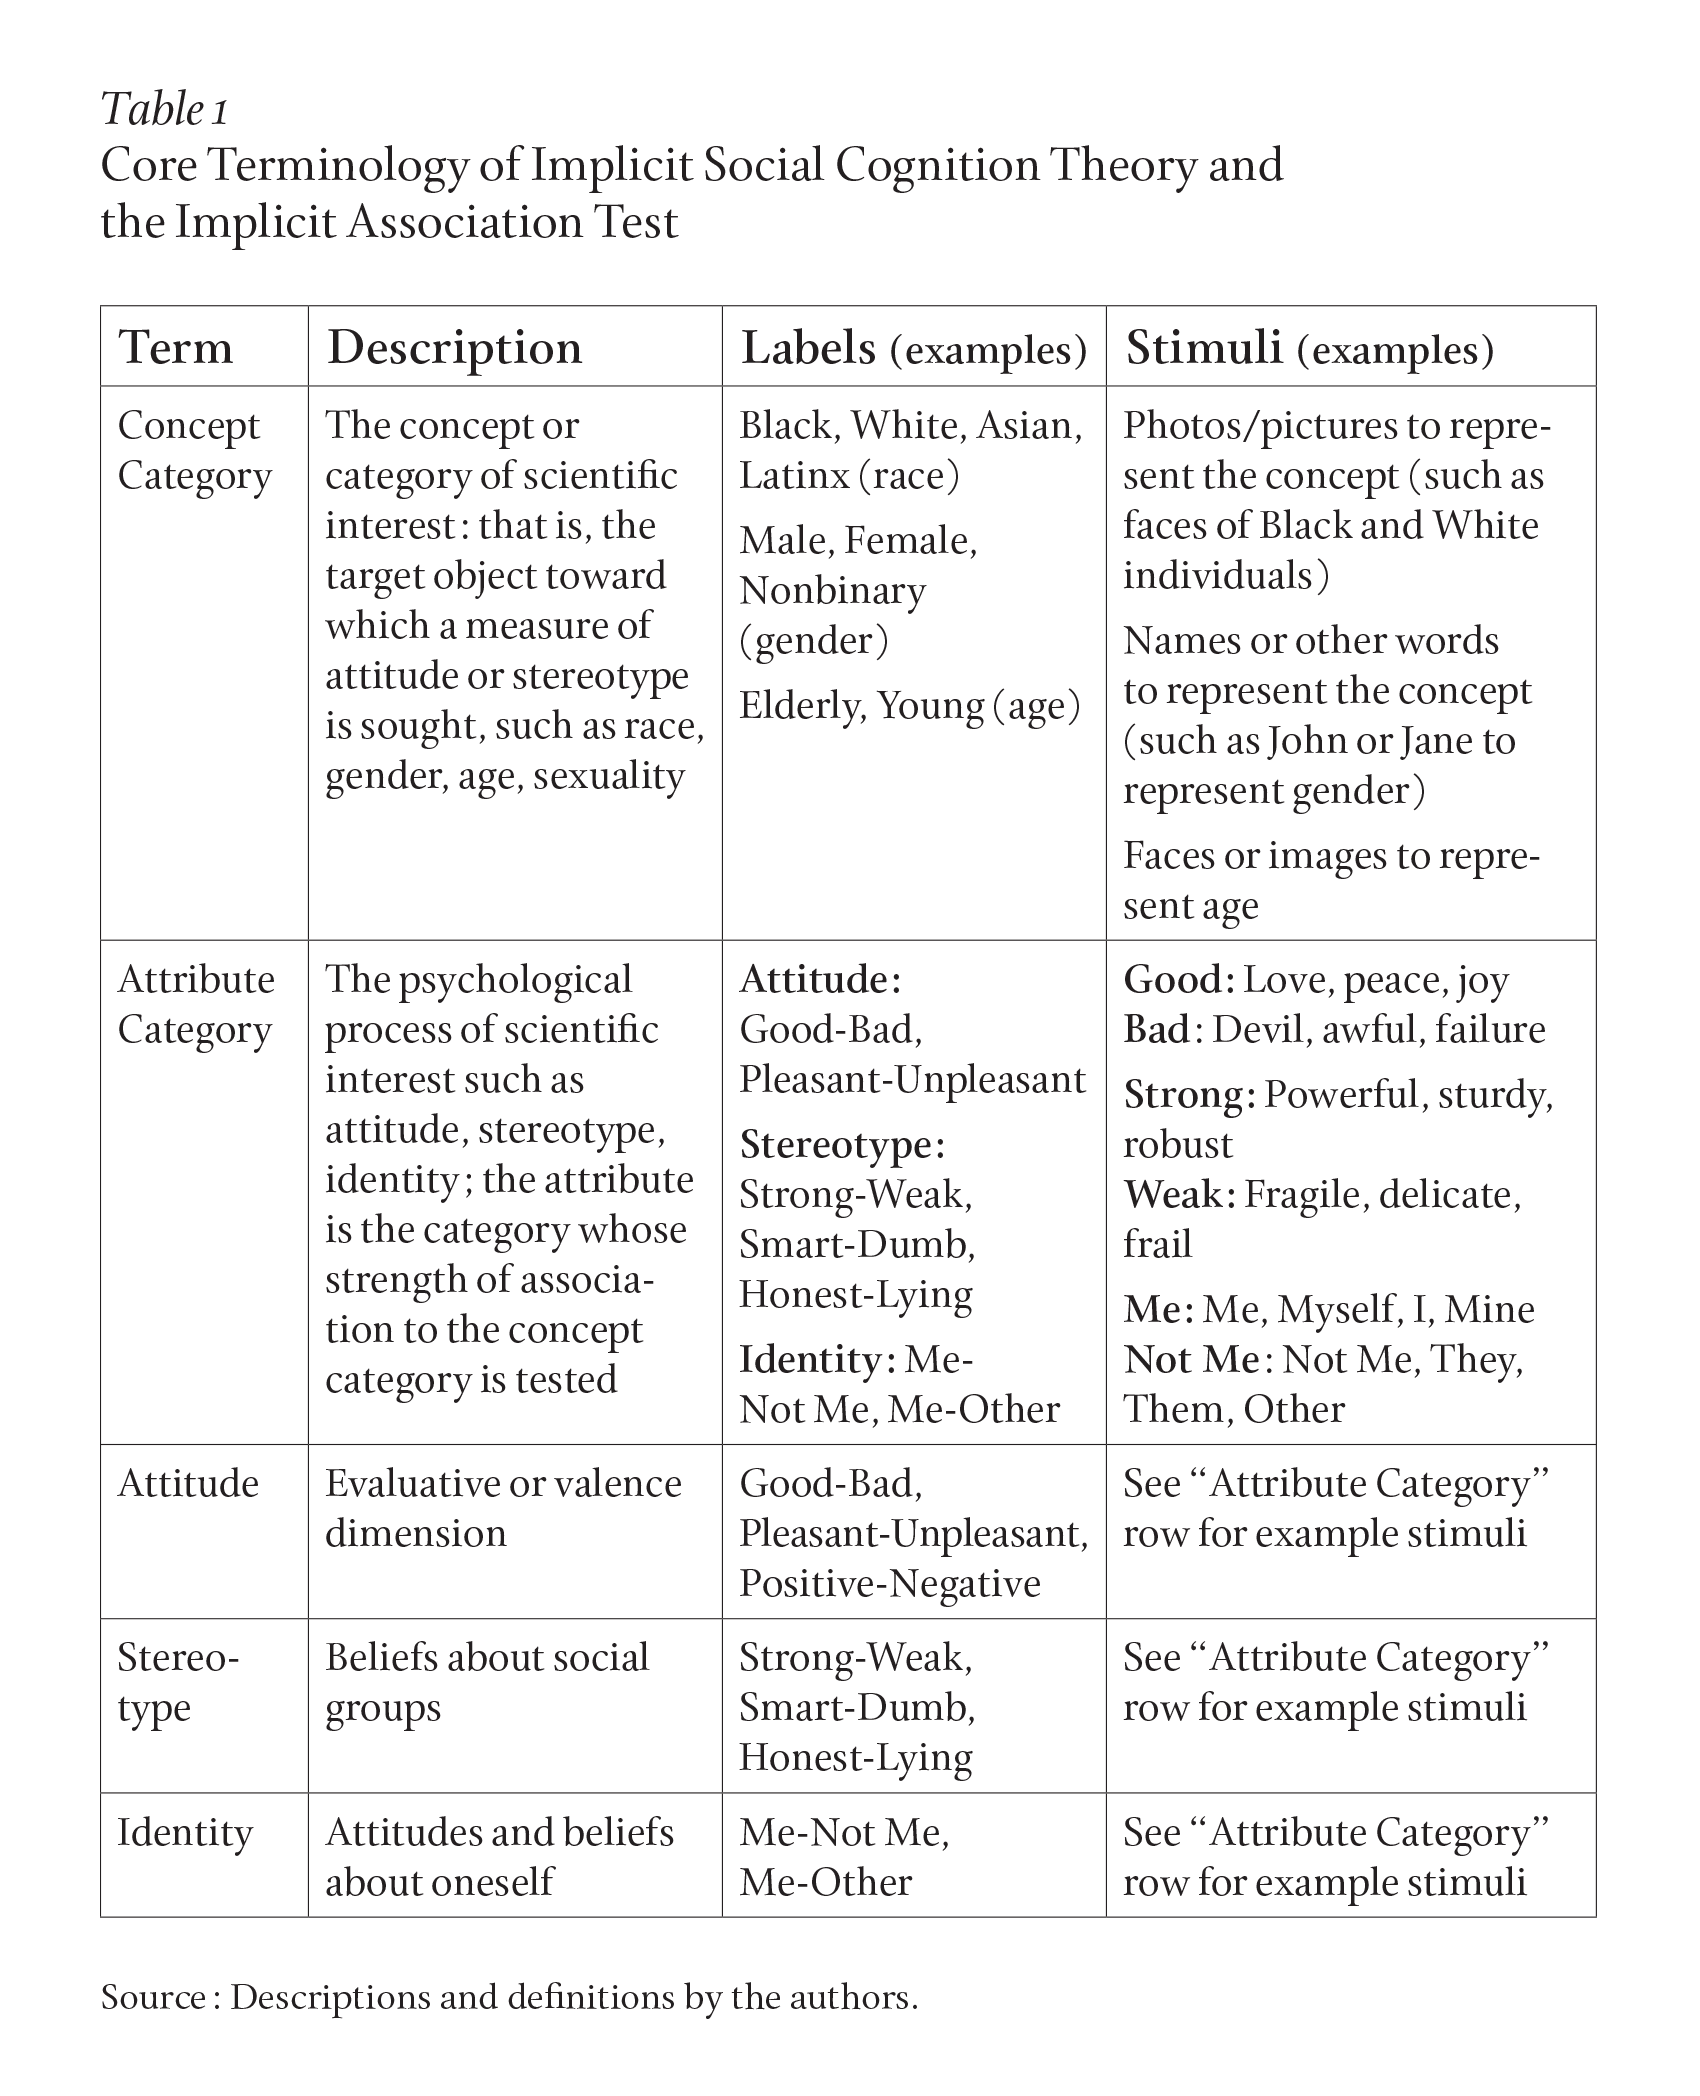 A table showing examples of labels and stimuli for categories of implicit social cognition theory, including concepts (race, gender, age, etc.), attributes (good-bad, pleasant-unpleasant, etc.), attitude (positive-negative), stereotypes (strong-weak, smart-dumb, etc.), and identity (me-not me, me-other, etc.).